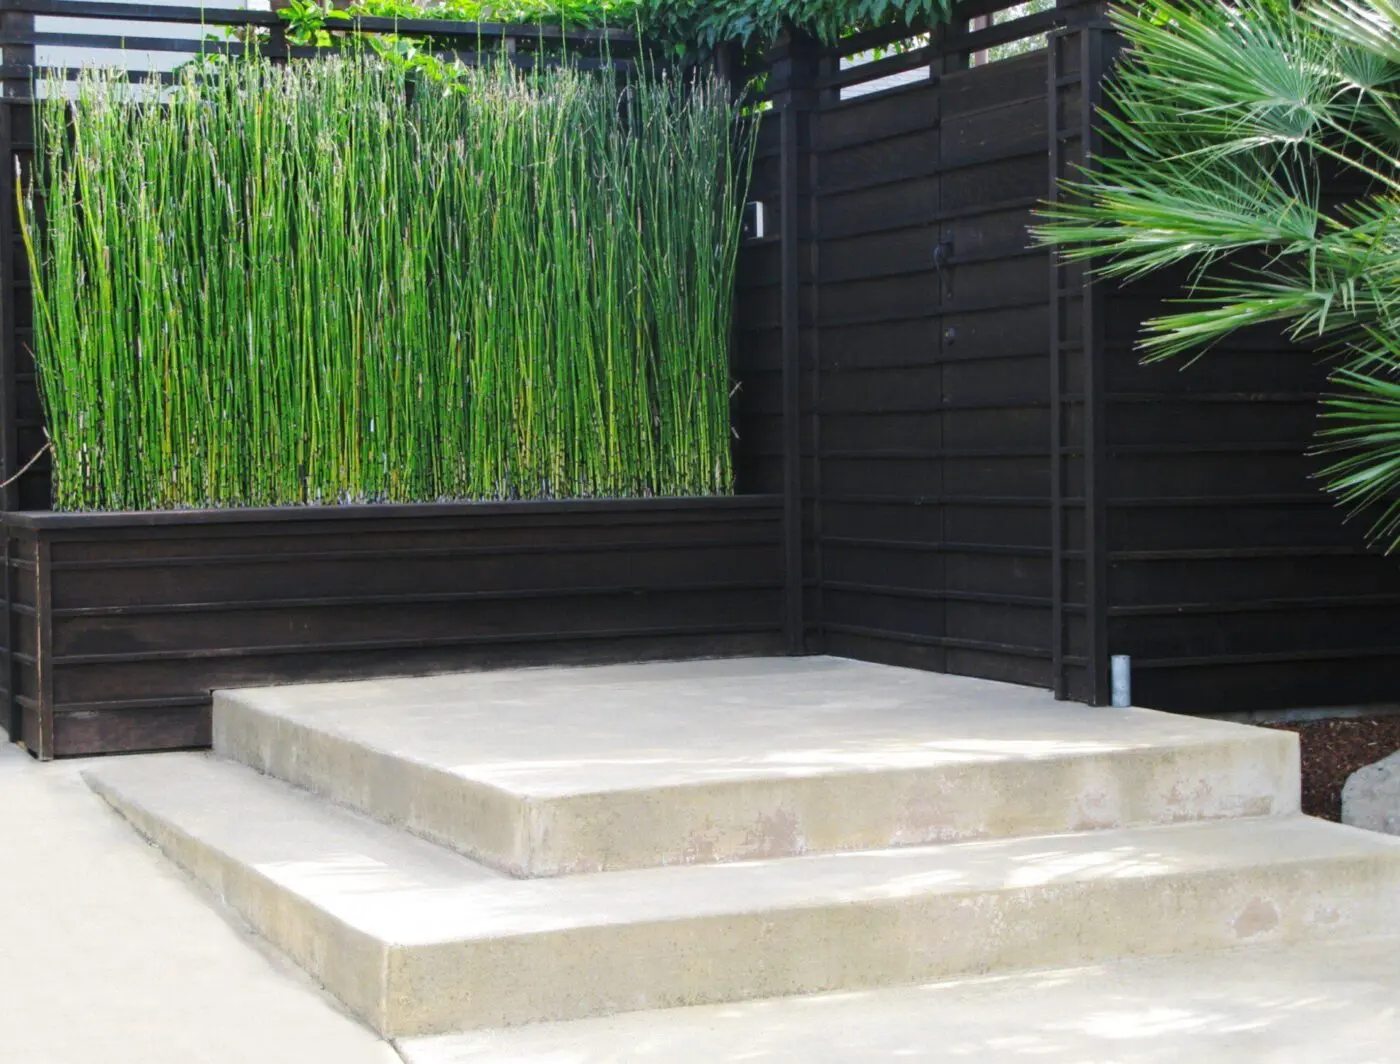 Concrete steps, courtesy of Lauderdale Concrete, lead up to a small platform surrounded by a dark wood fence. The platform is adjacent to tall, dense green reeds and a small palm plant on the right. The setting appears to be a modern, minimalist outdoor space in Coral Springs, FL.